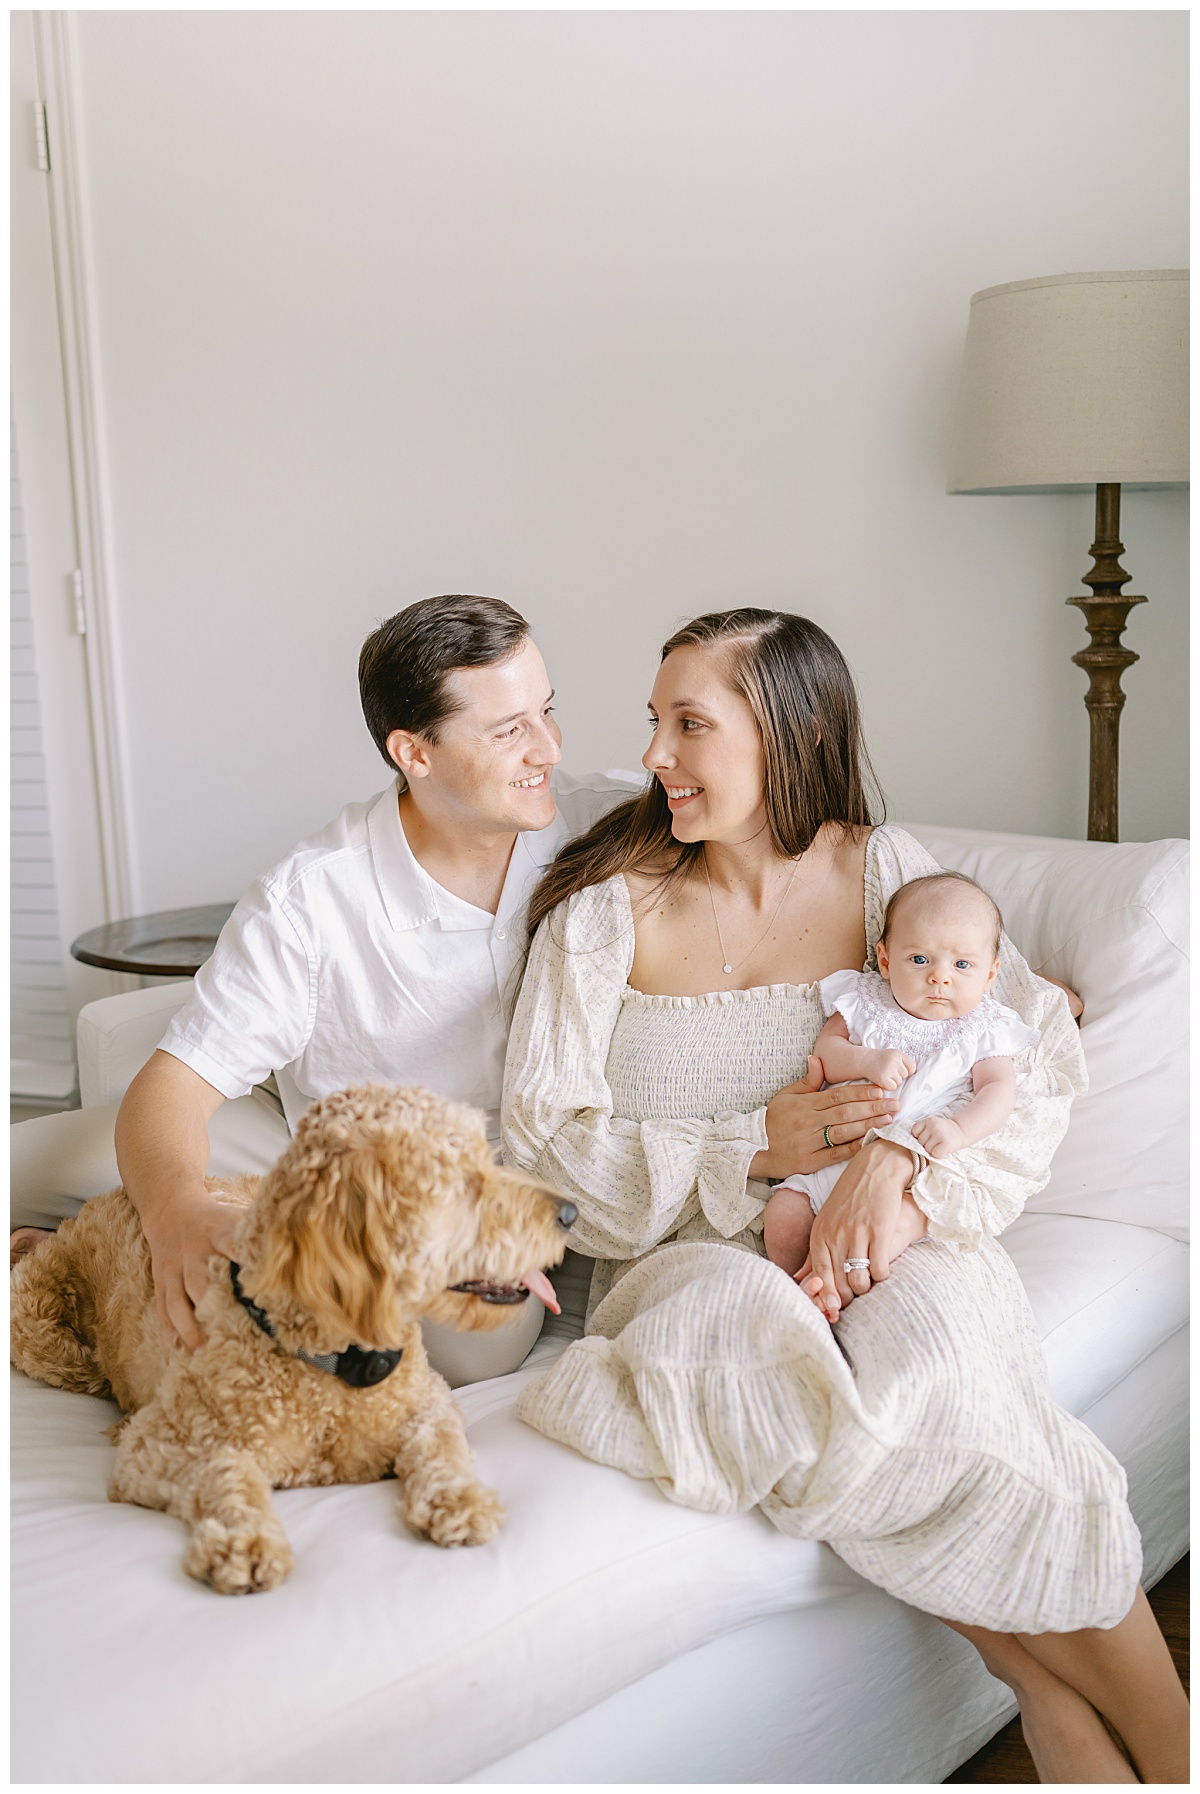 Mom and Dad snuggle with goldendoole and newborn baby girl for their in-home newborn session in San Antonio, TX taken by Teressa Jane Photography, a San Antonio Newborn Photographer.